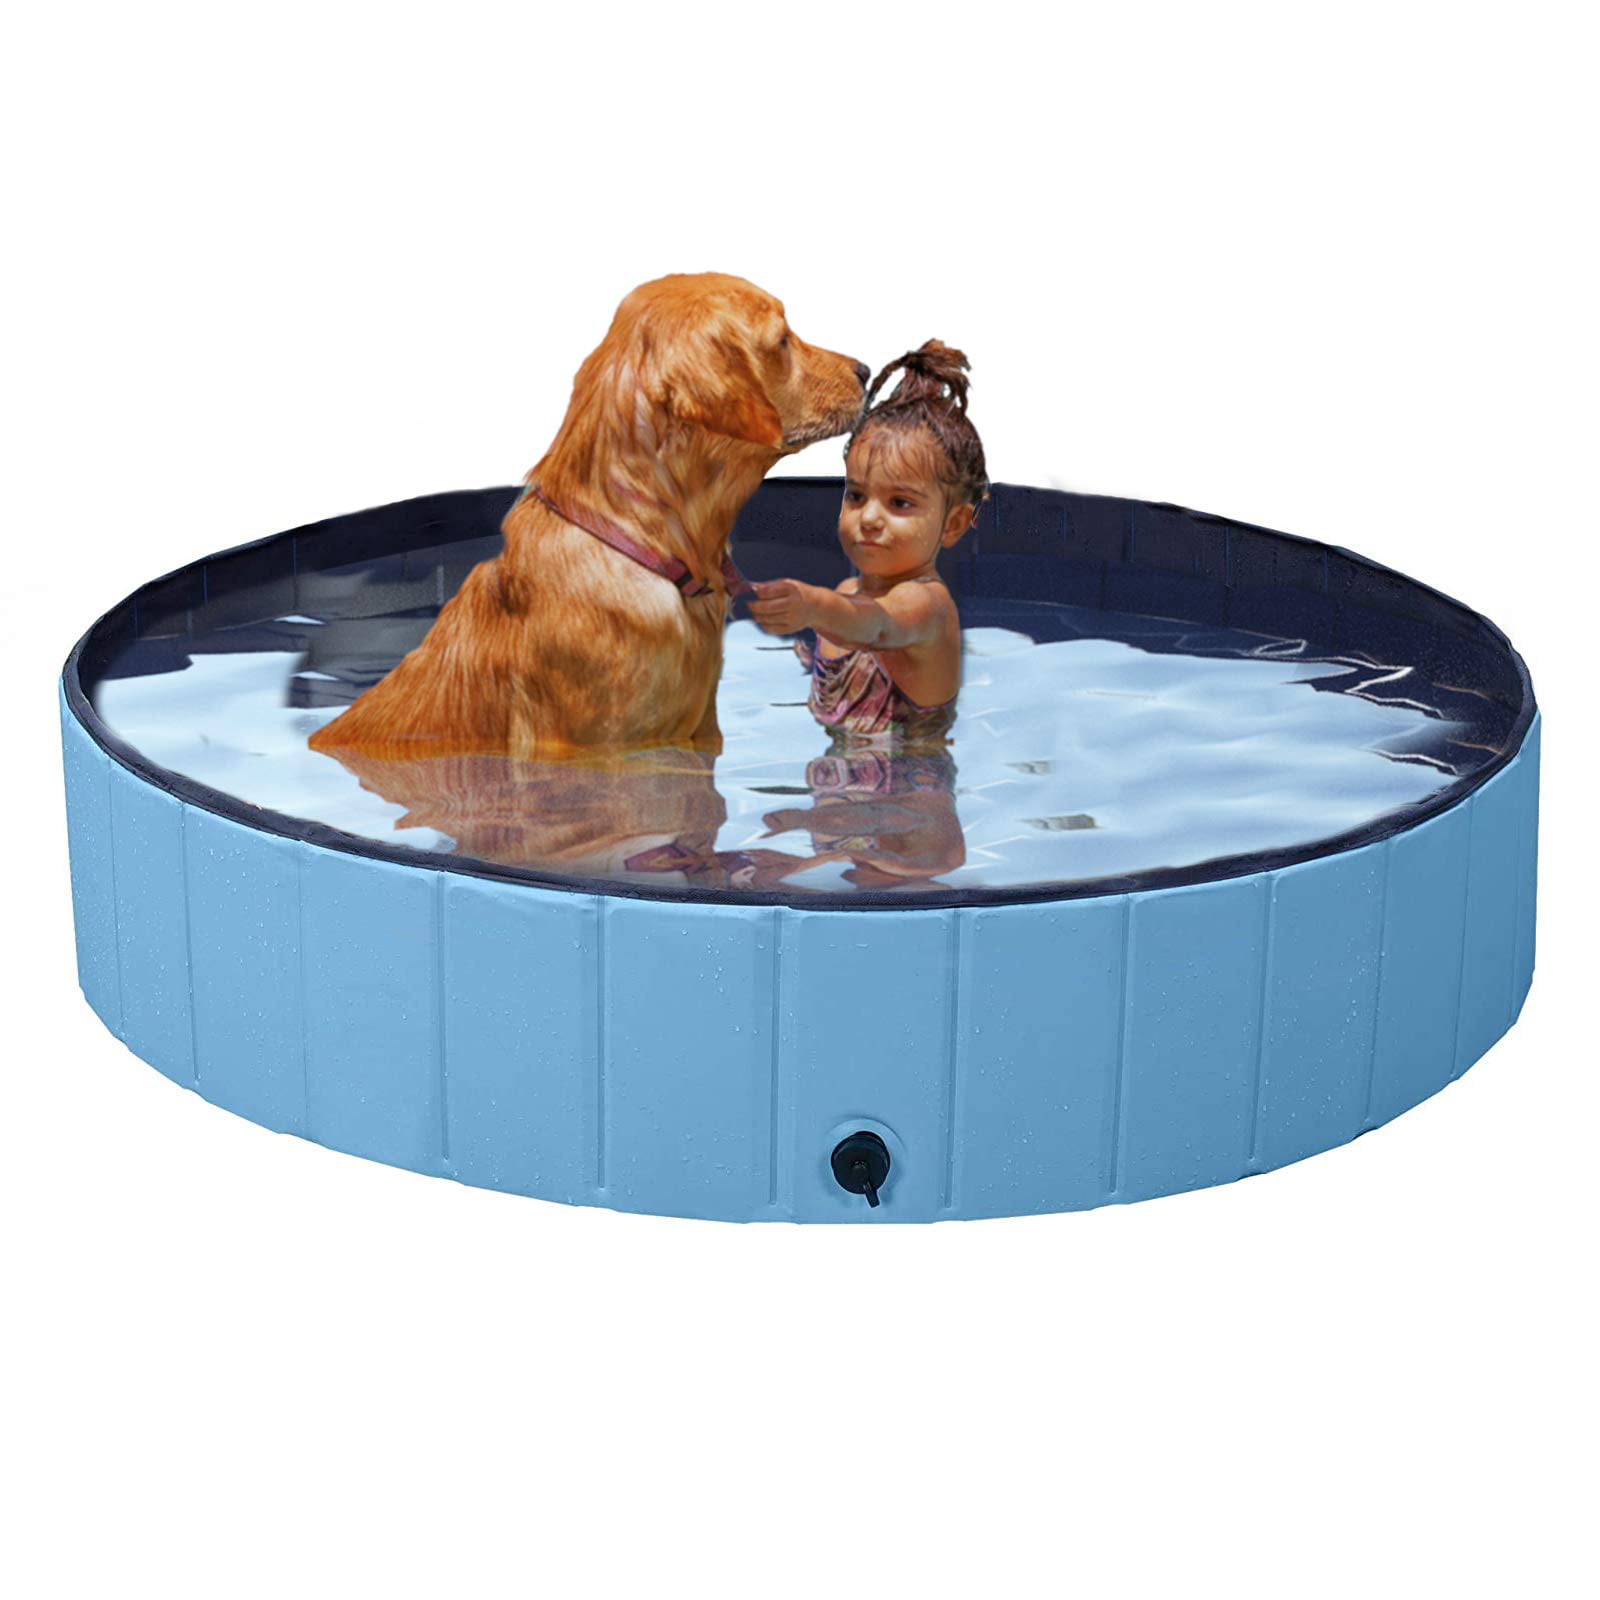 Folding Pool for Dogs,48inch Foldable Pet Kids Swimming Pool,Portable Collapsible Kiddie Bath Pool for Outdoor Backyard PVC Bathing Shower Tub Bathtub for Large Medium Small Dogs and Cats L-48